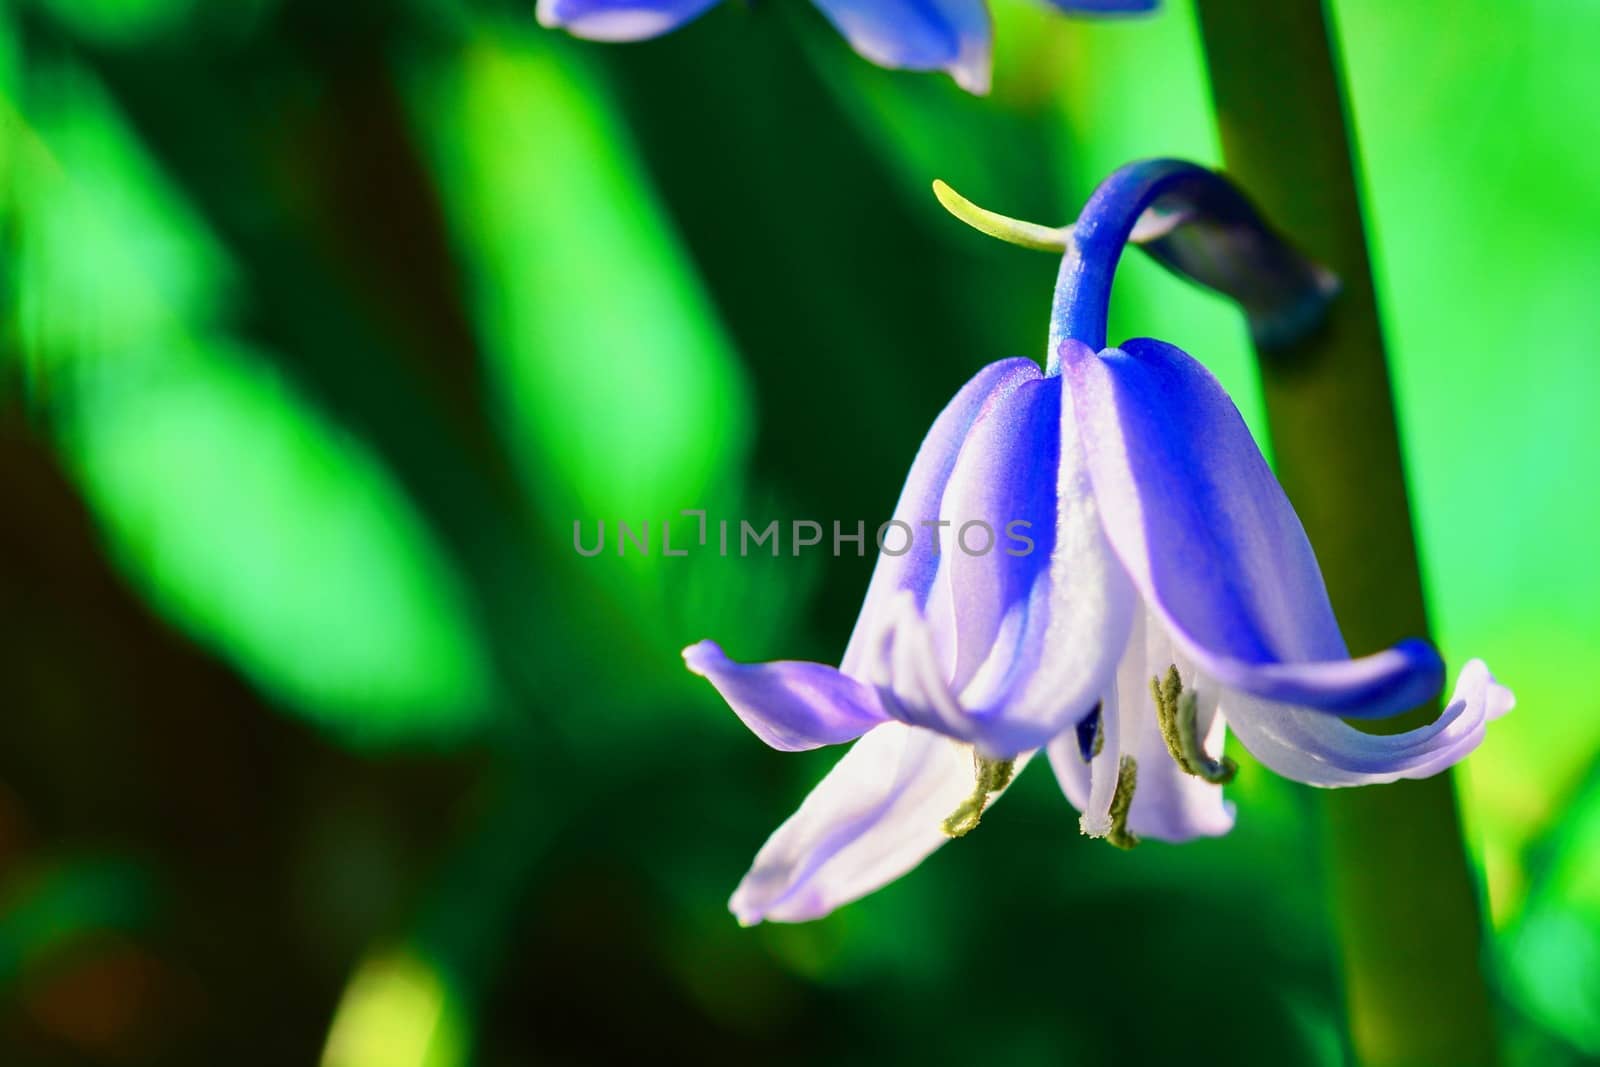 Hyacinthoides non-scripta is a bulbous perennial plant, found in Atlantic areas from north-western Spain to the British Isles, and also frequently used as a garden plant.